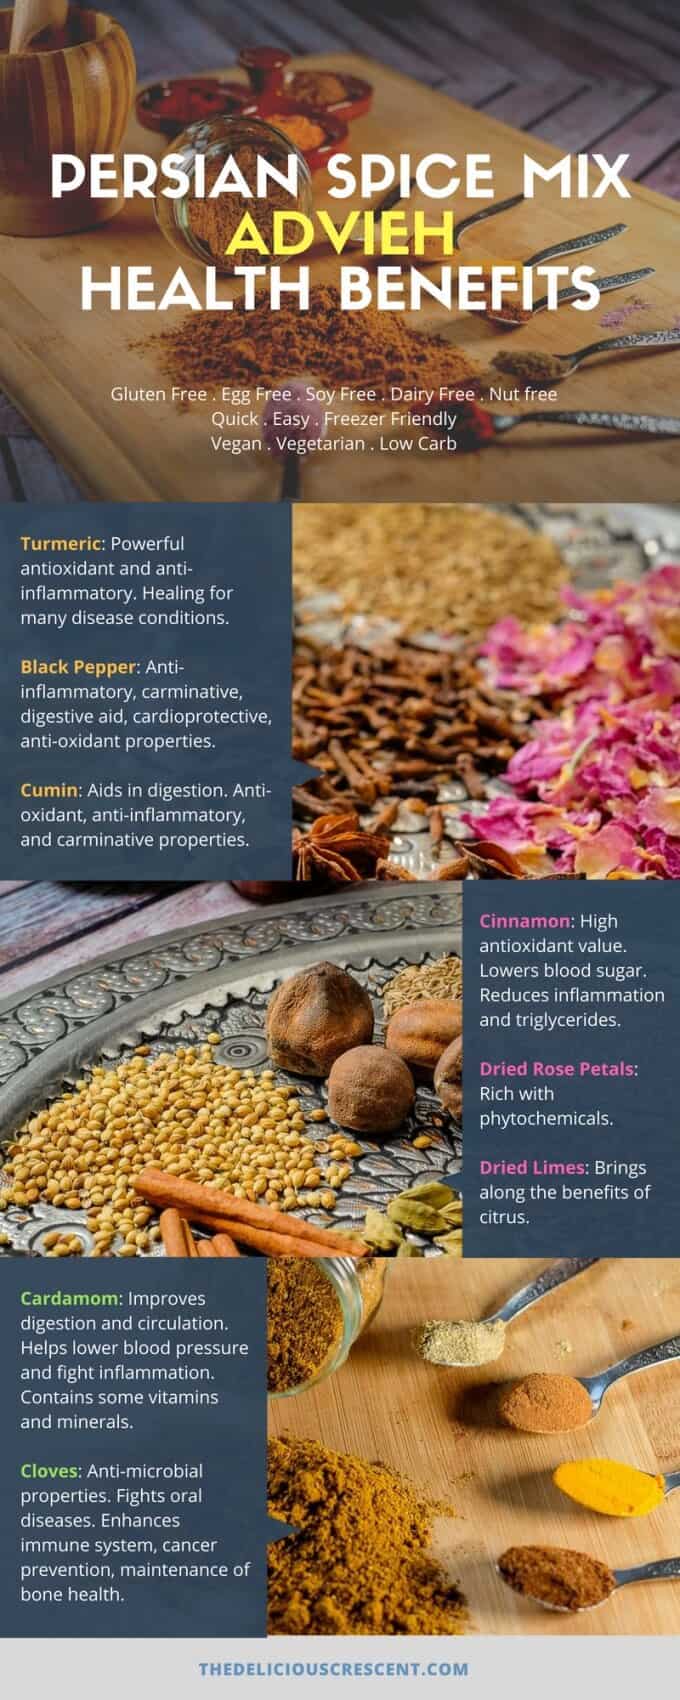 The health benefits of the spice ingredients in advieh, the Persian spice mix